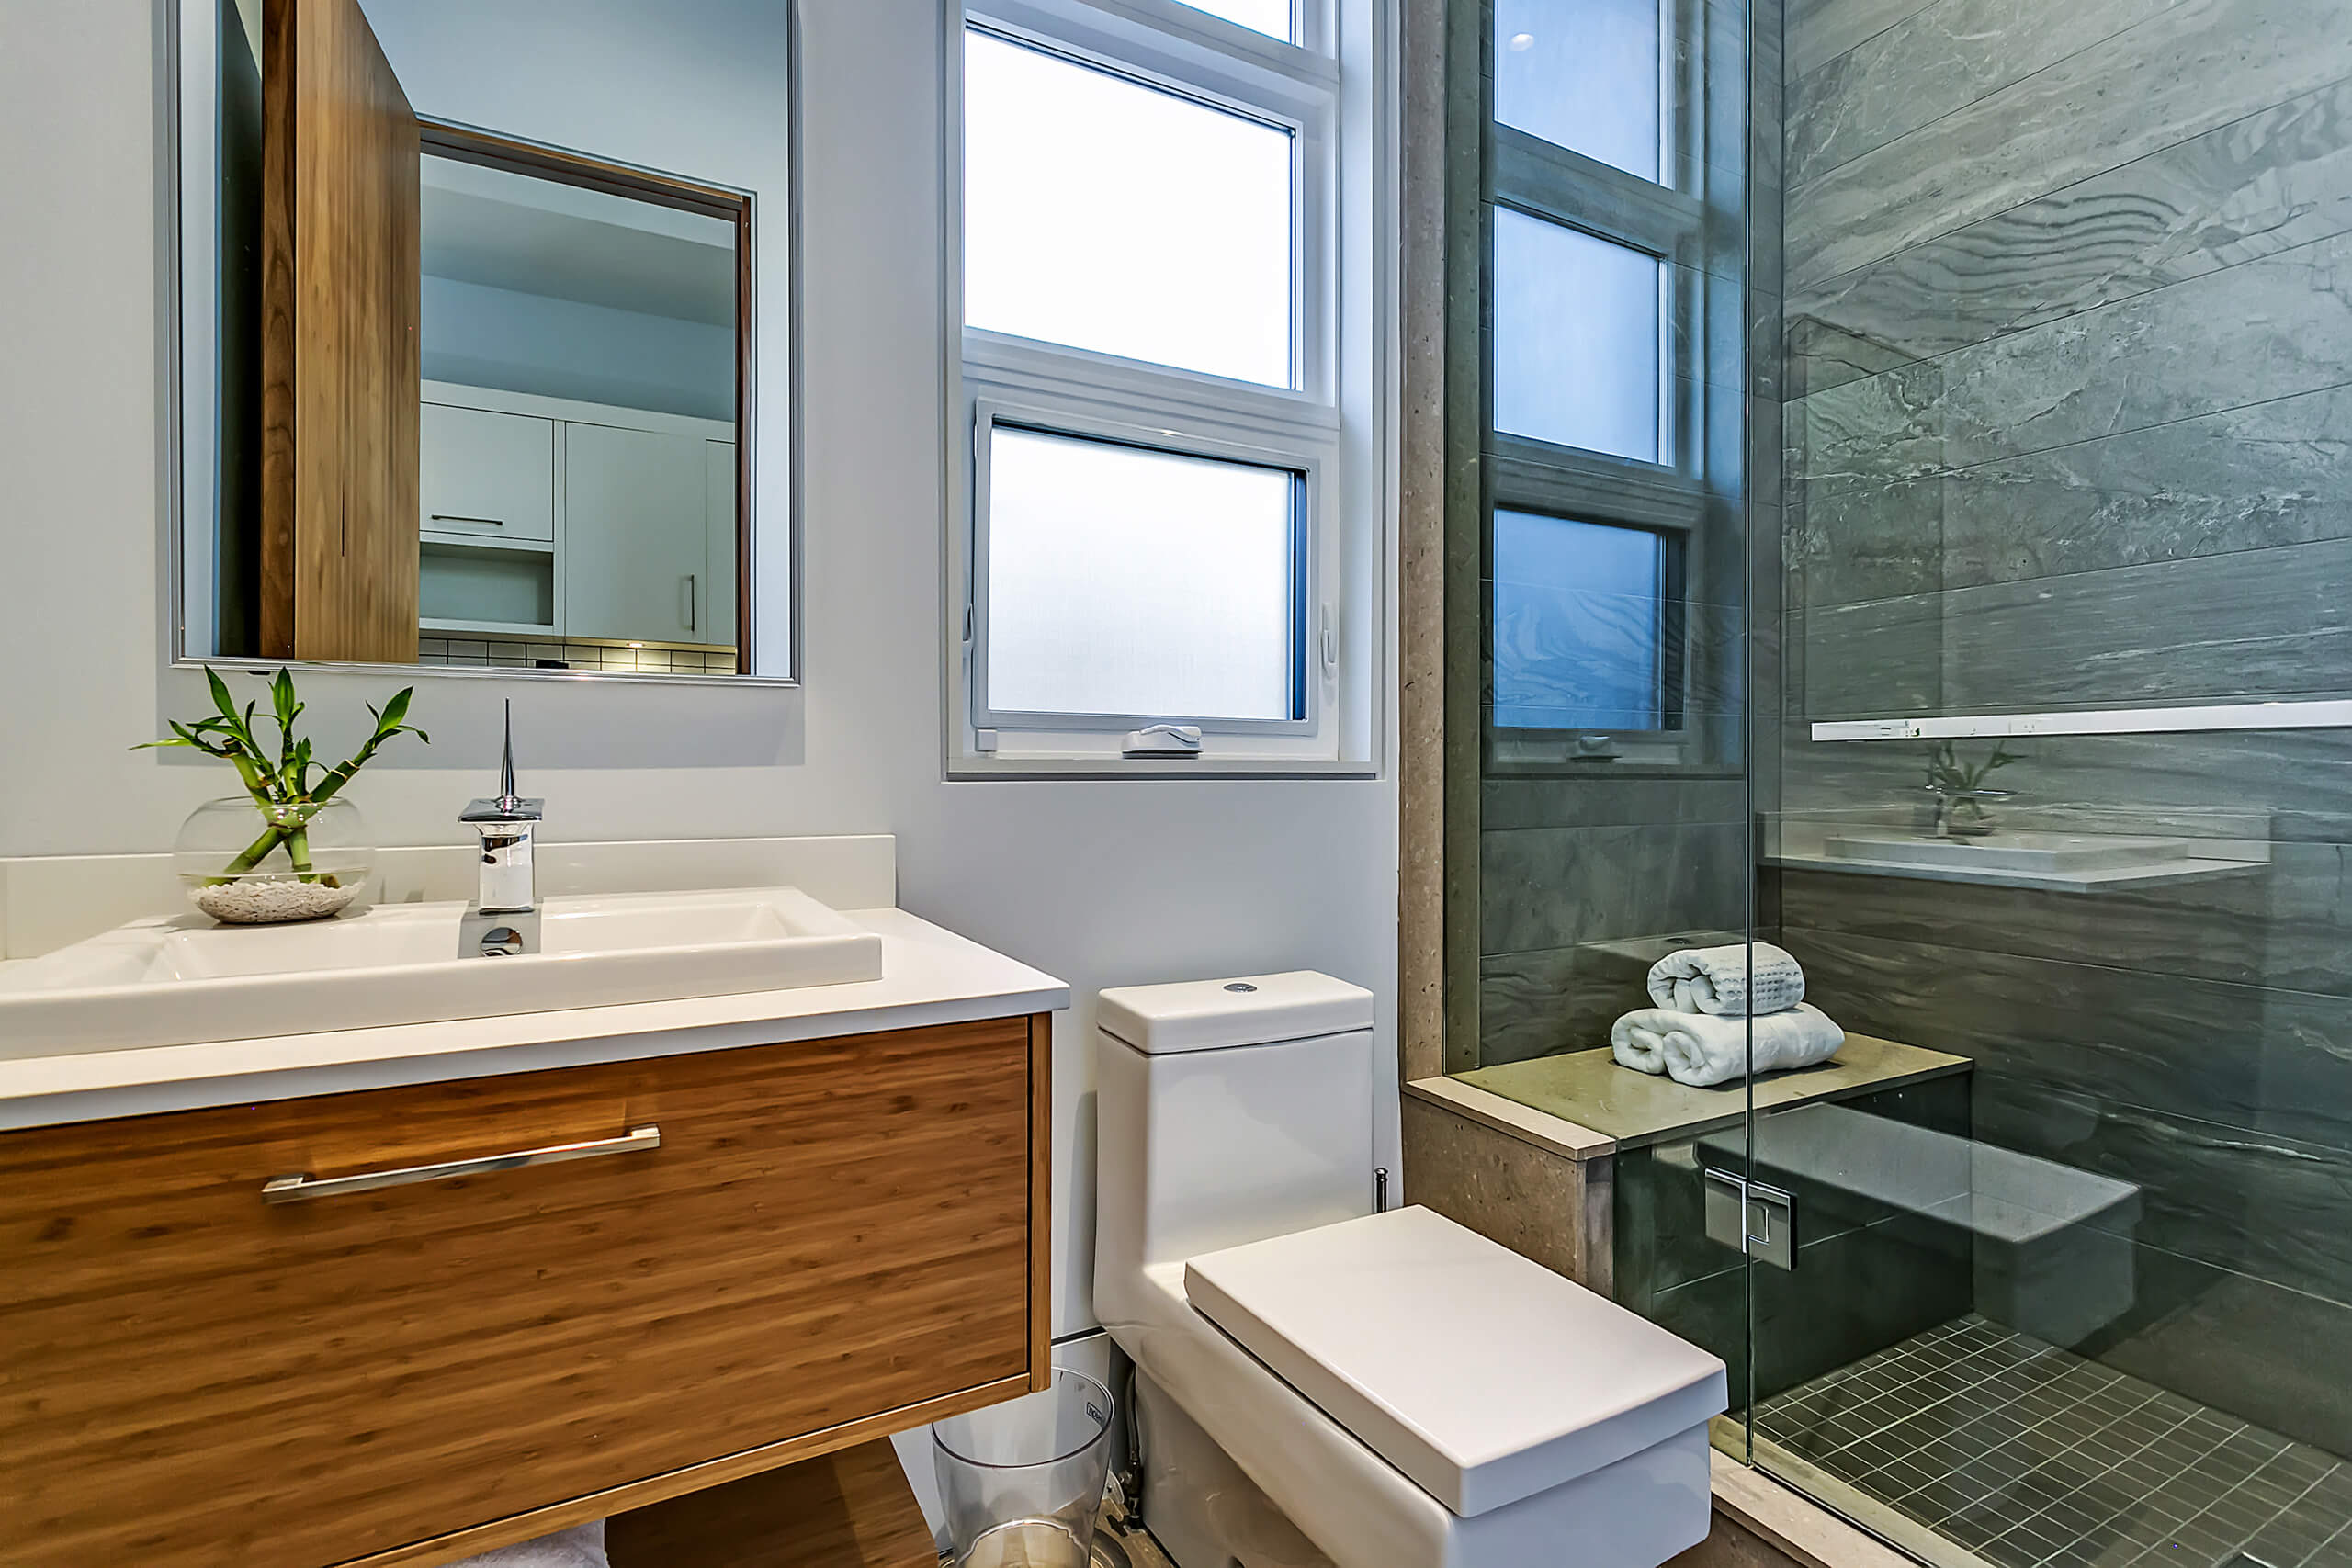 Awning windows in the Bathroom